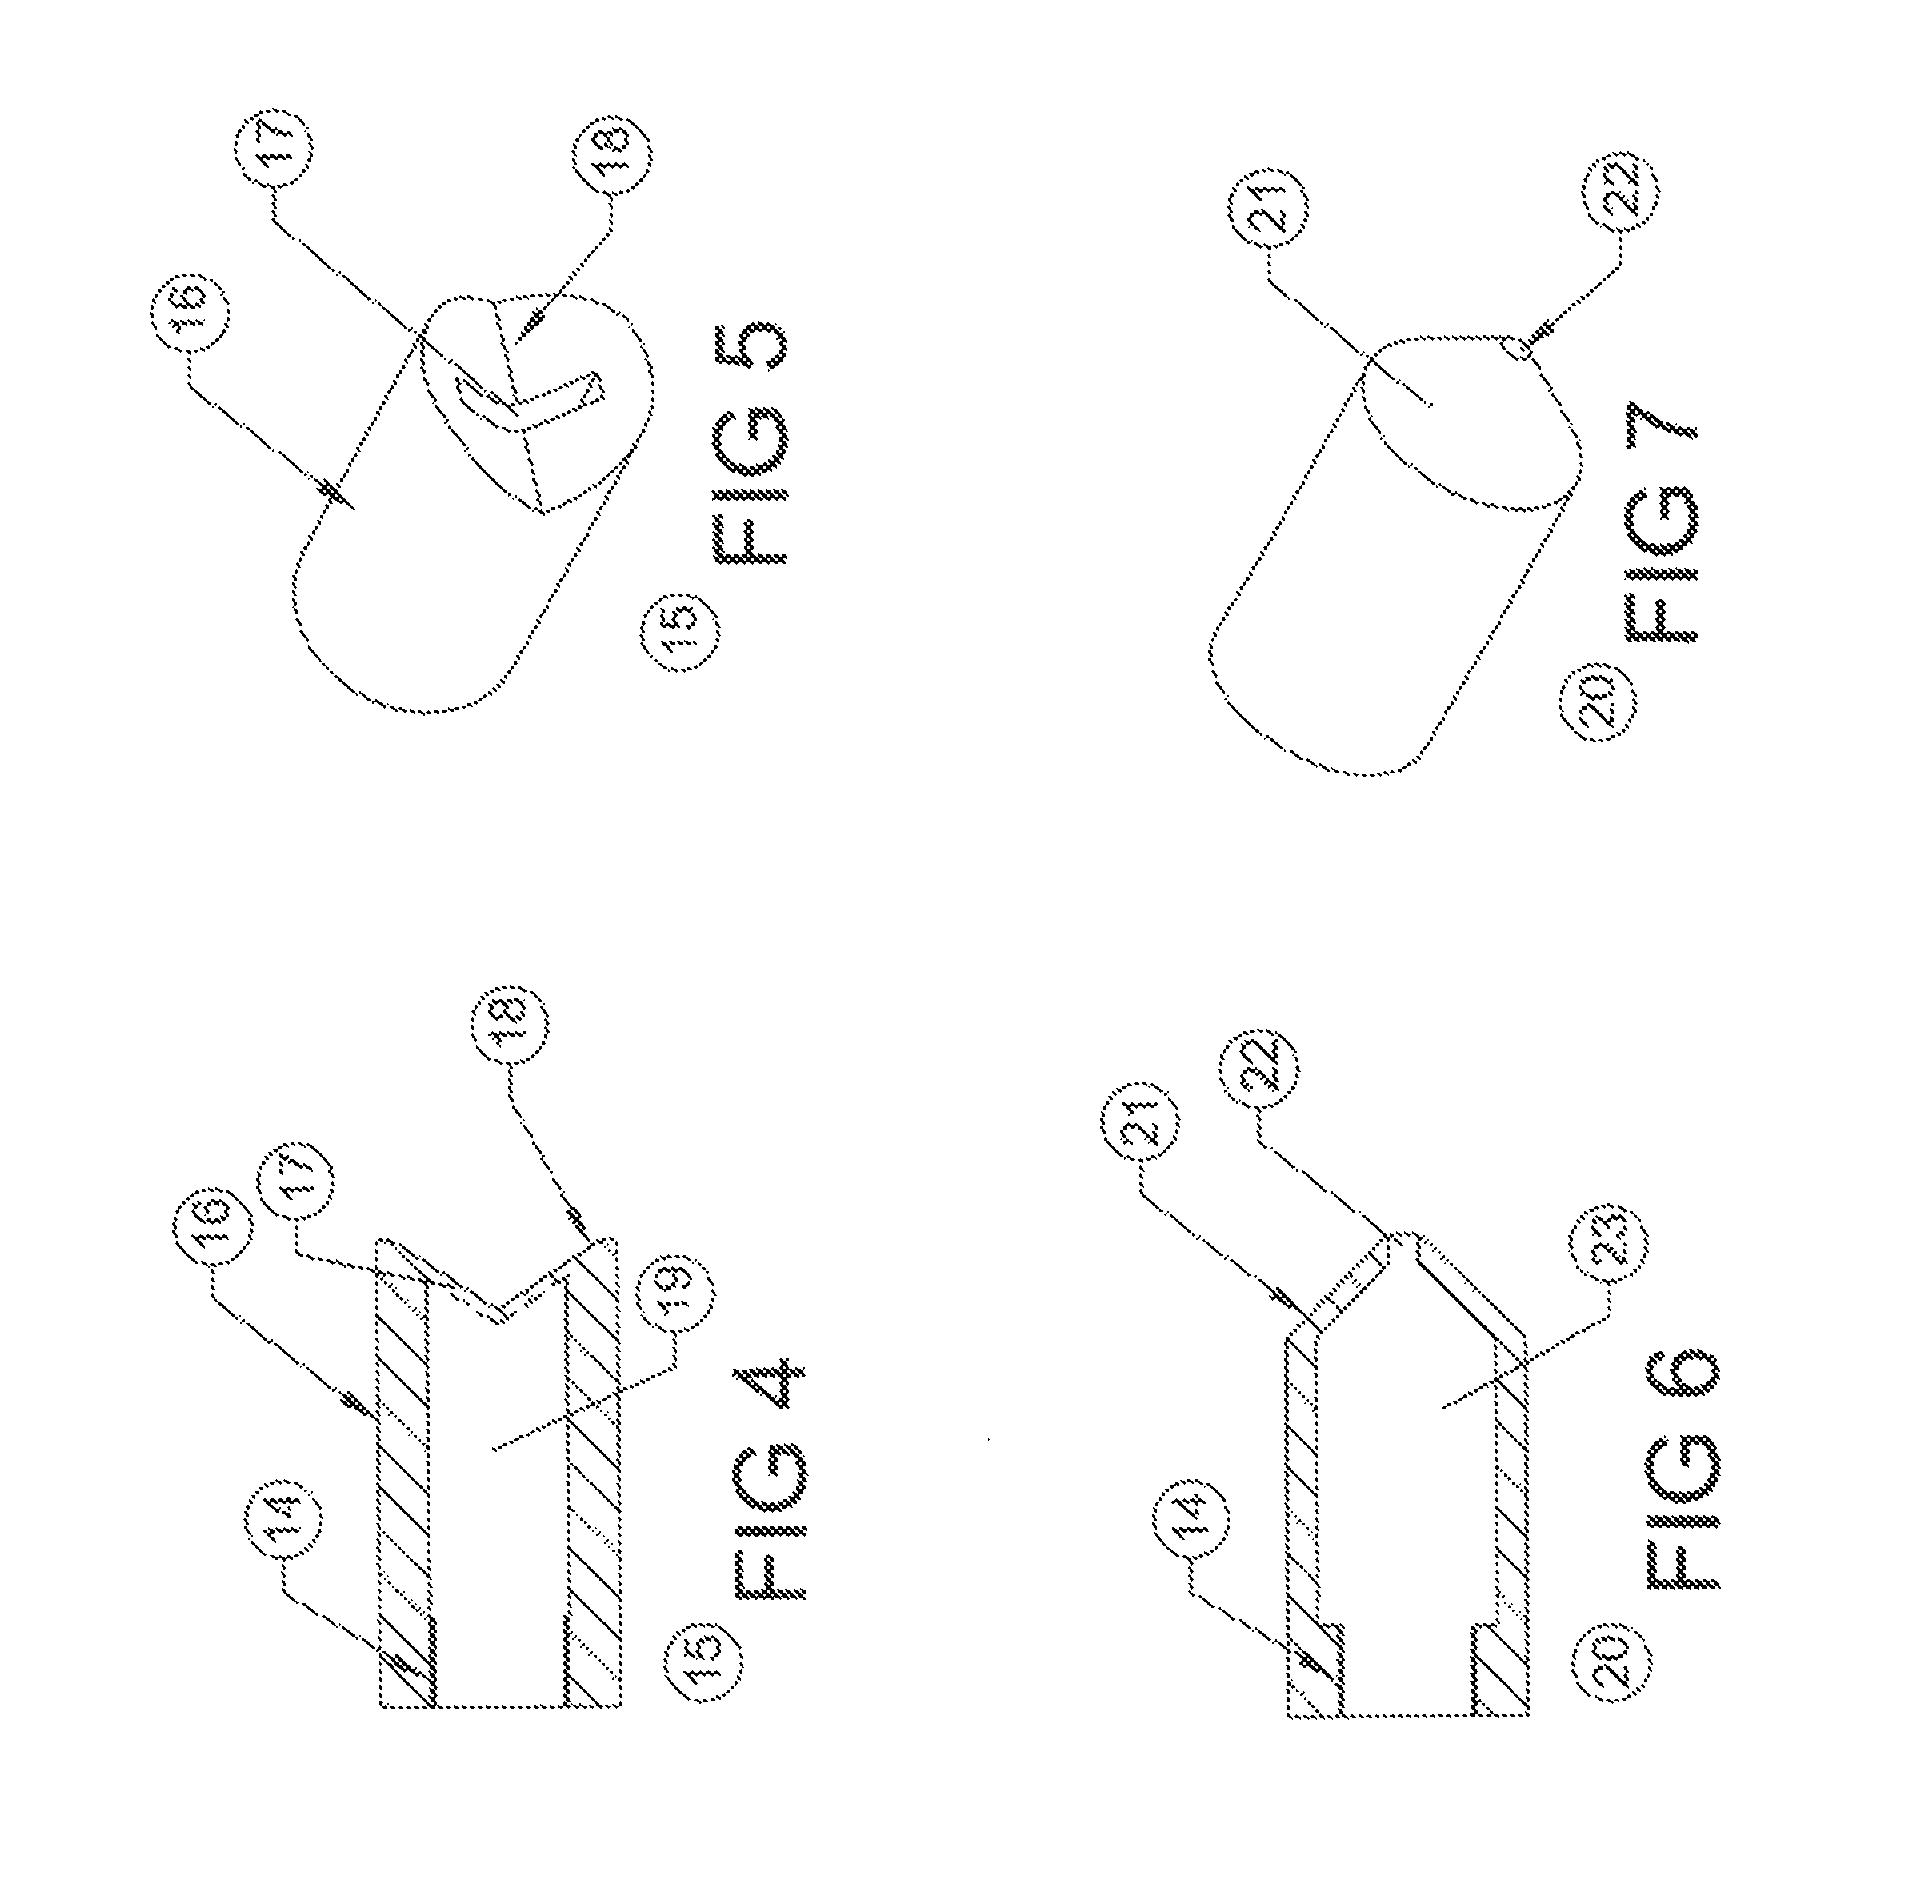 Rotating and oscillating breaching device with reactive material